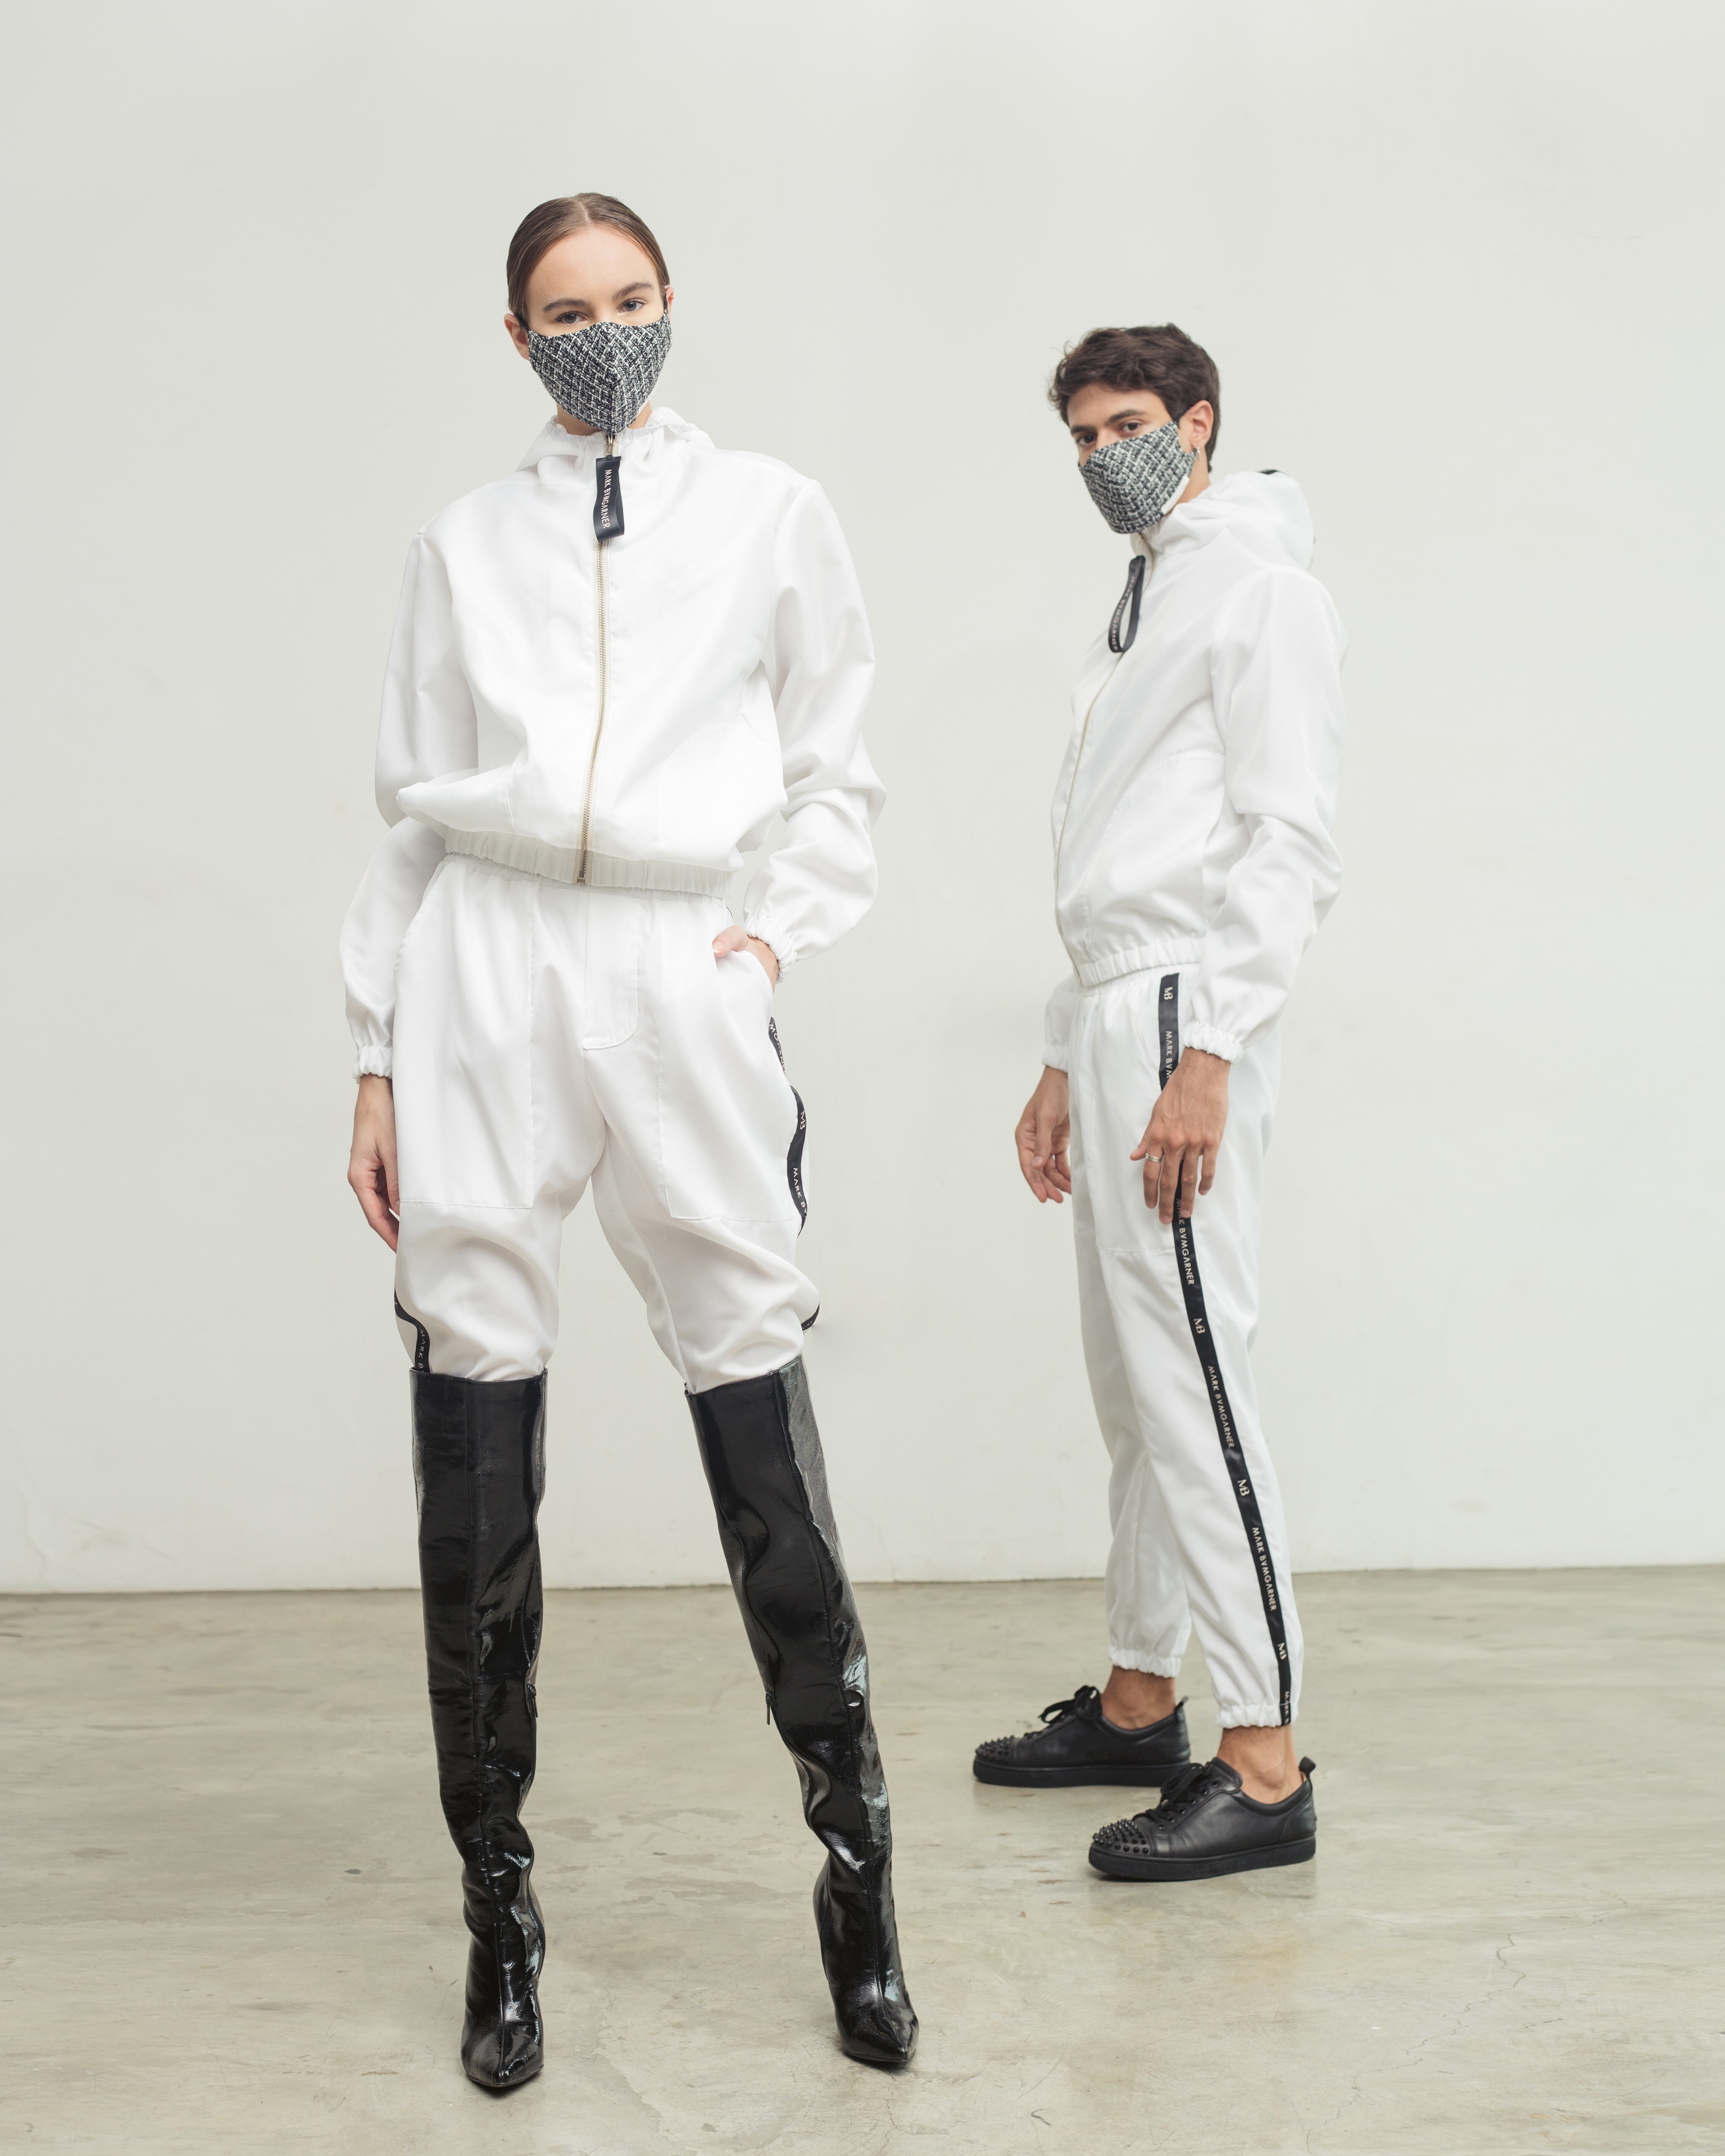 Philippines fashion-forward PPE from Mark Bumgarner’s collection ‘The Armor Project’. Photo: Handout